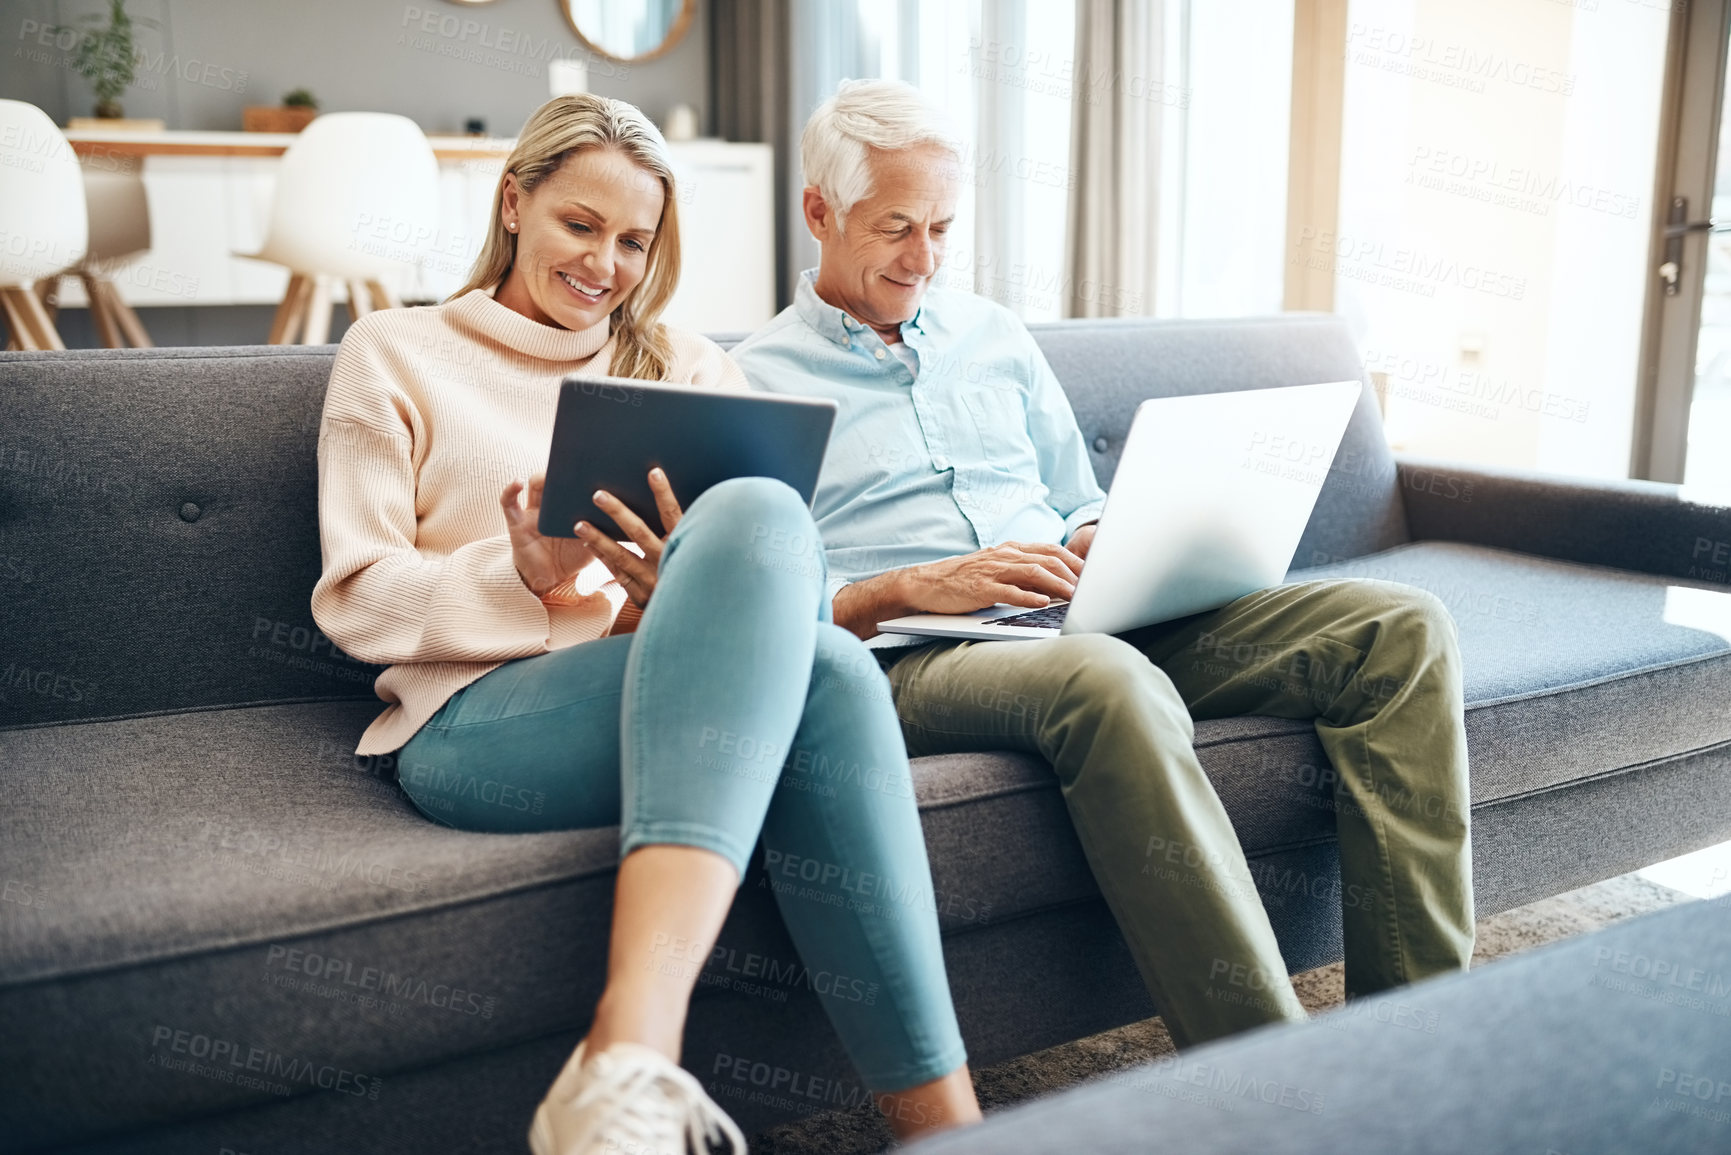 Buy stock photo Cropped shot of mature couple using a laptop on the sofa at home